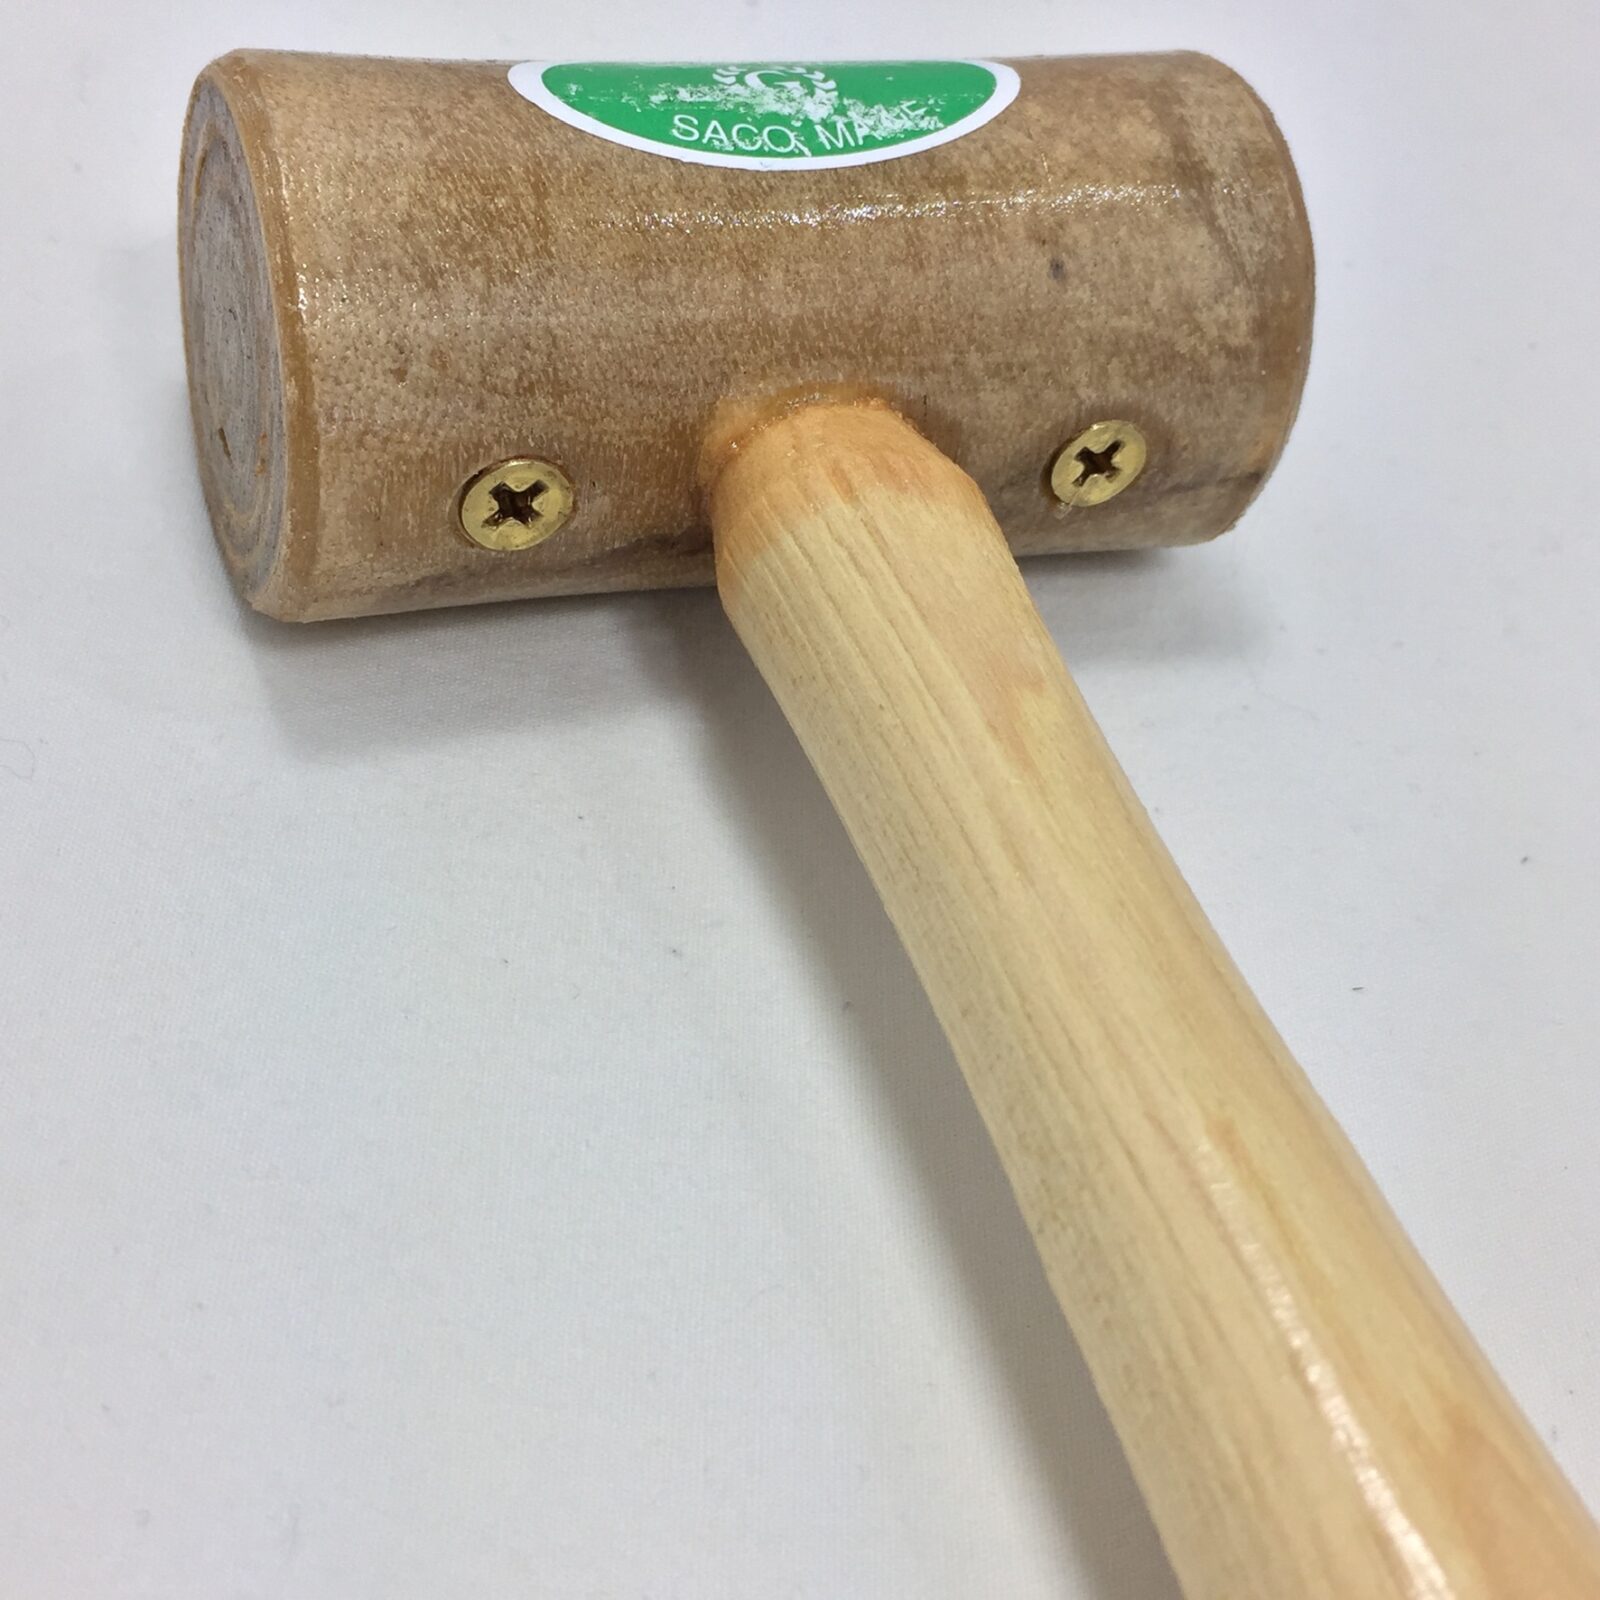 Rawhide Mallet Construction View